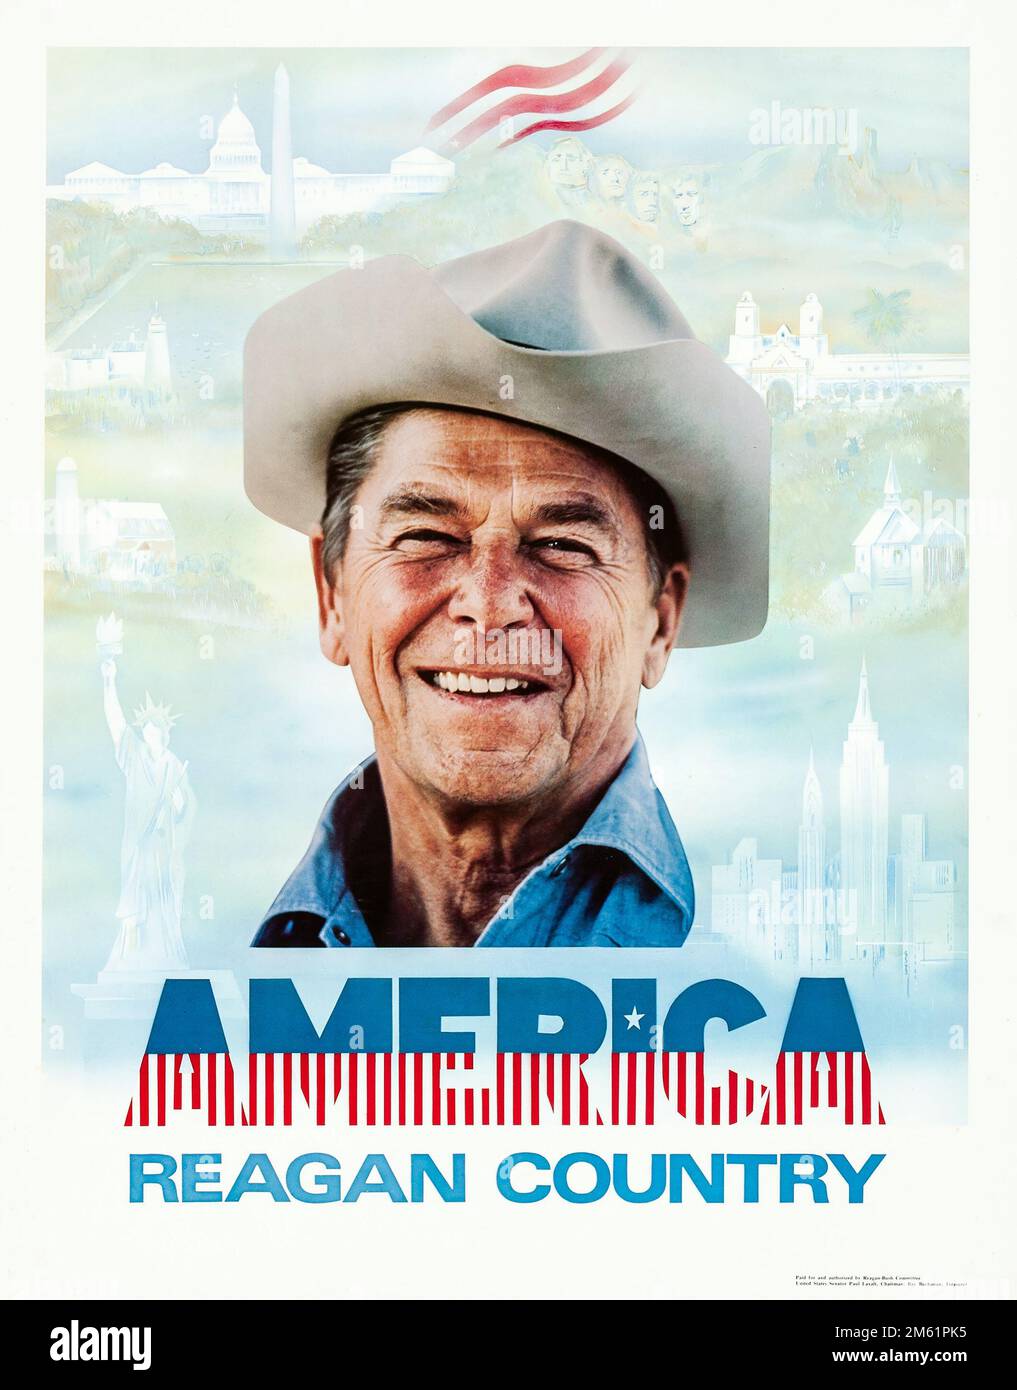 America - Reagan Country (Reagan-Bush Committee, 1980) Political Poster feat a smiling Ronald Reagan wearing a cowboy hat. Stock Photo